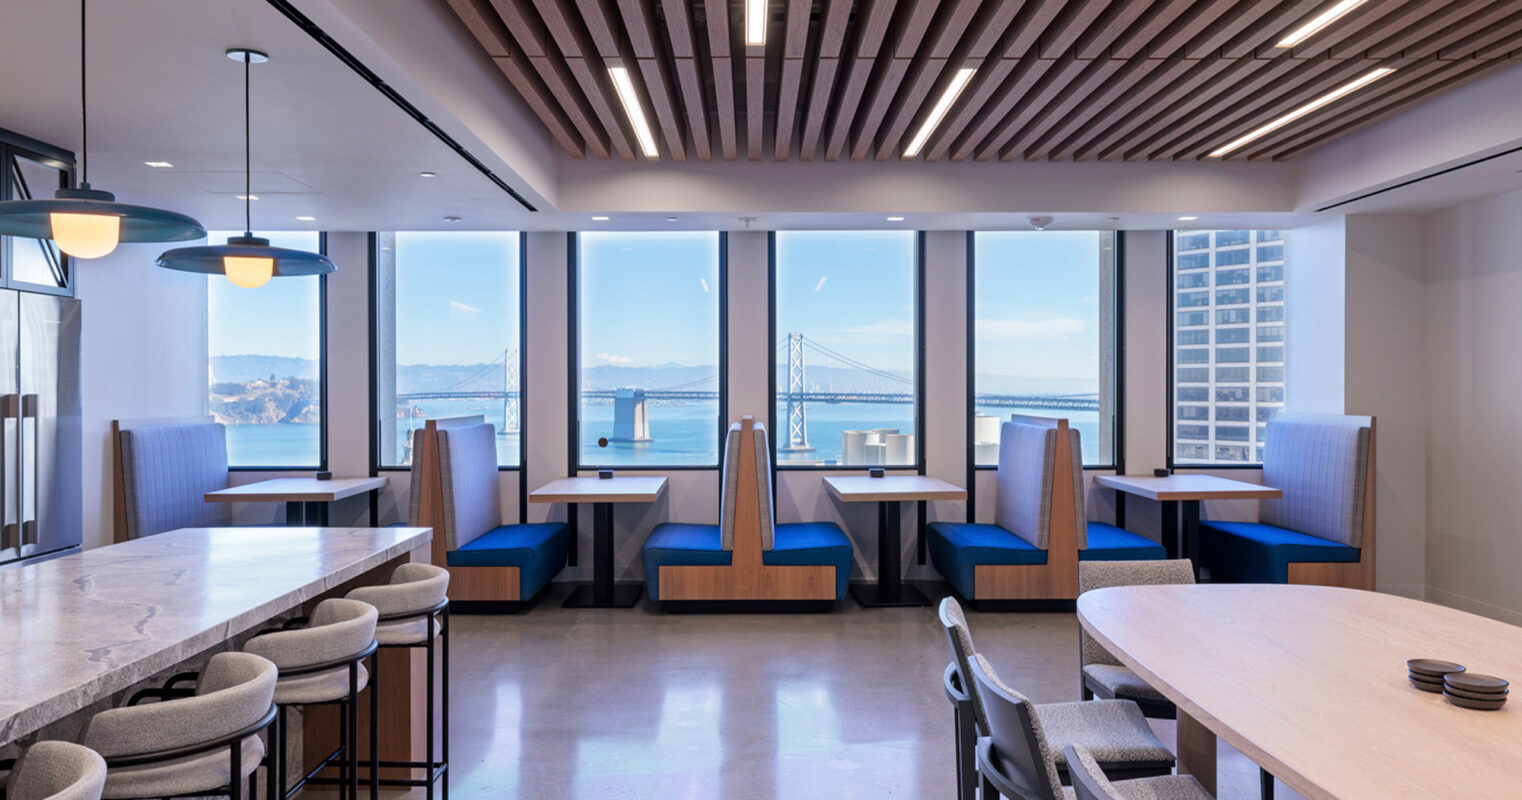 Modern office break room overlooking a bridge through expansive windows, featuring wooden slat ceiling accents, sleek pendant lighting, and two-tone banquette seating. Neutral flooring complements the space's minimalist aesthetic.